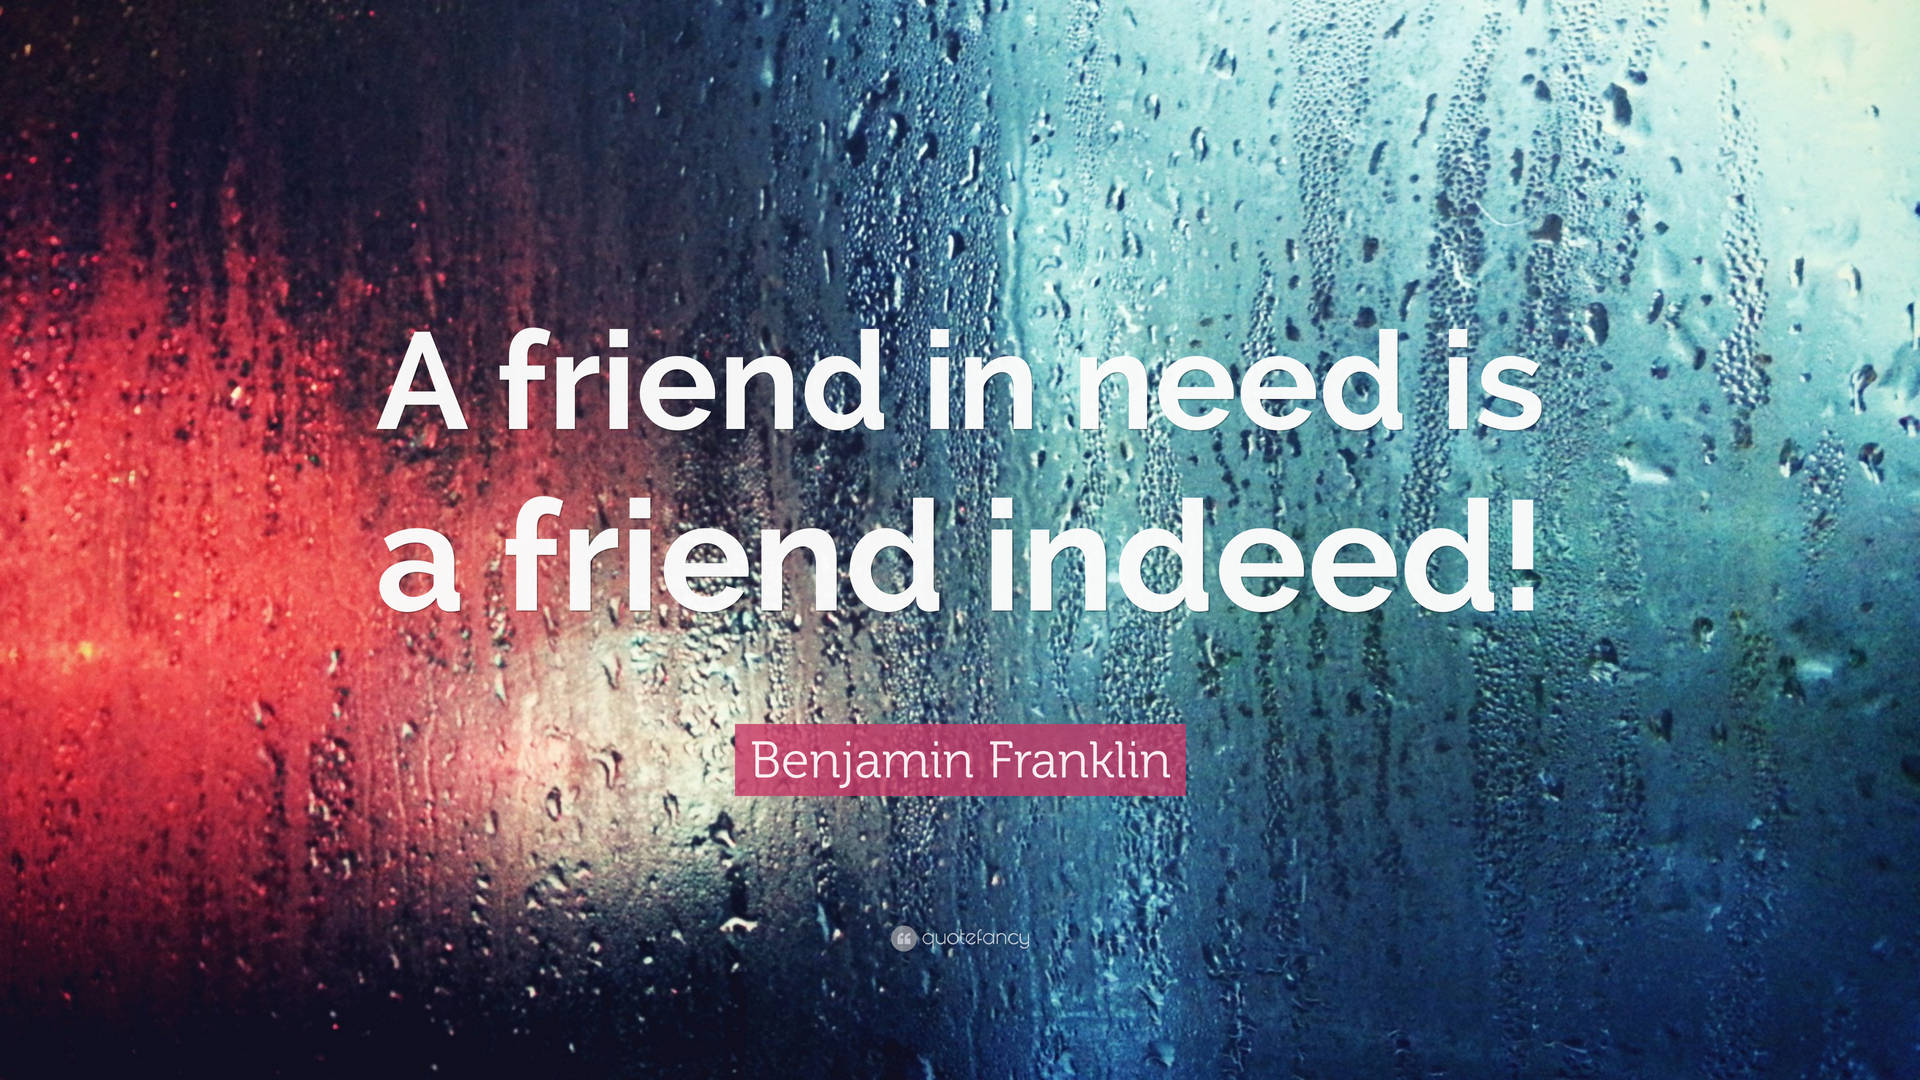 Indeed Friendship Quote Graphic Wallpaper